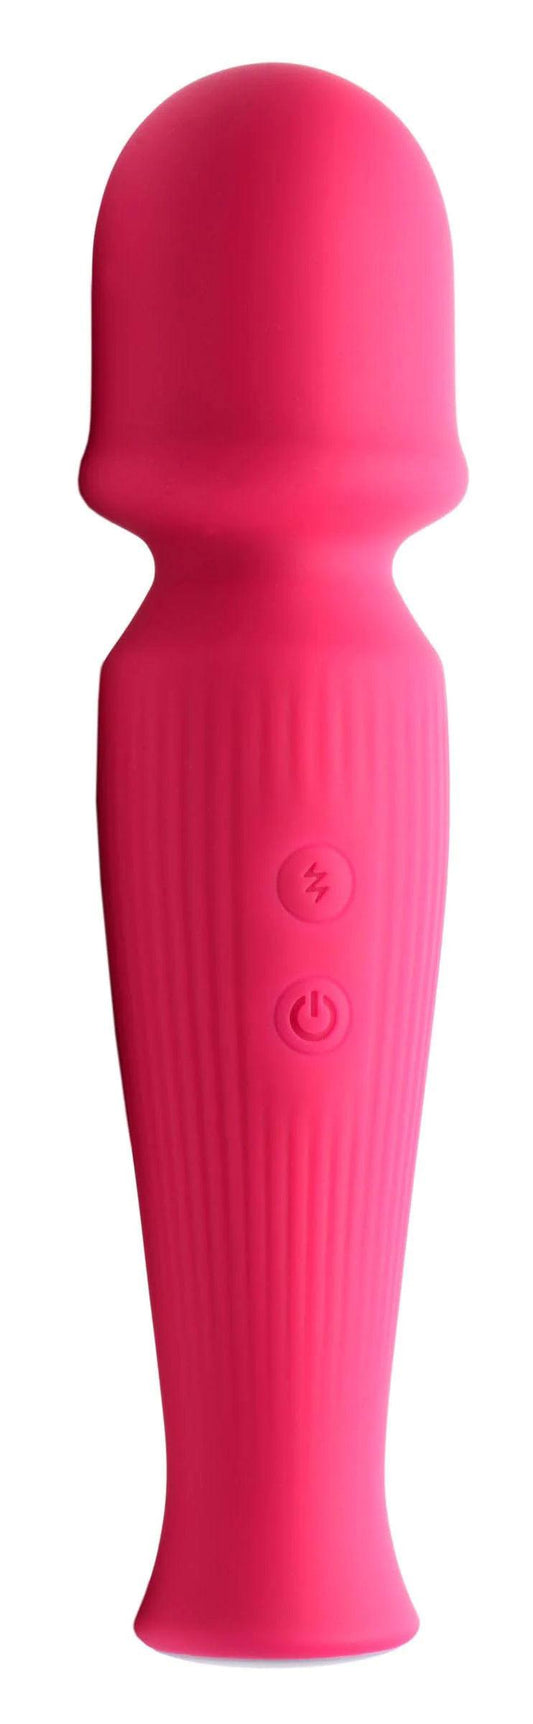 Silicone Wand Massager - Magenta - My Sex Toy Hub